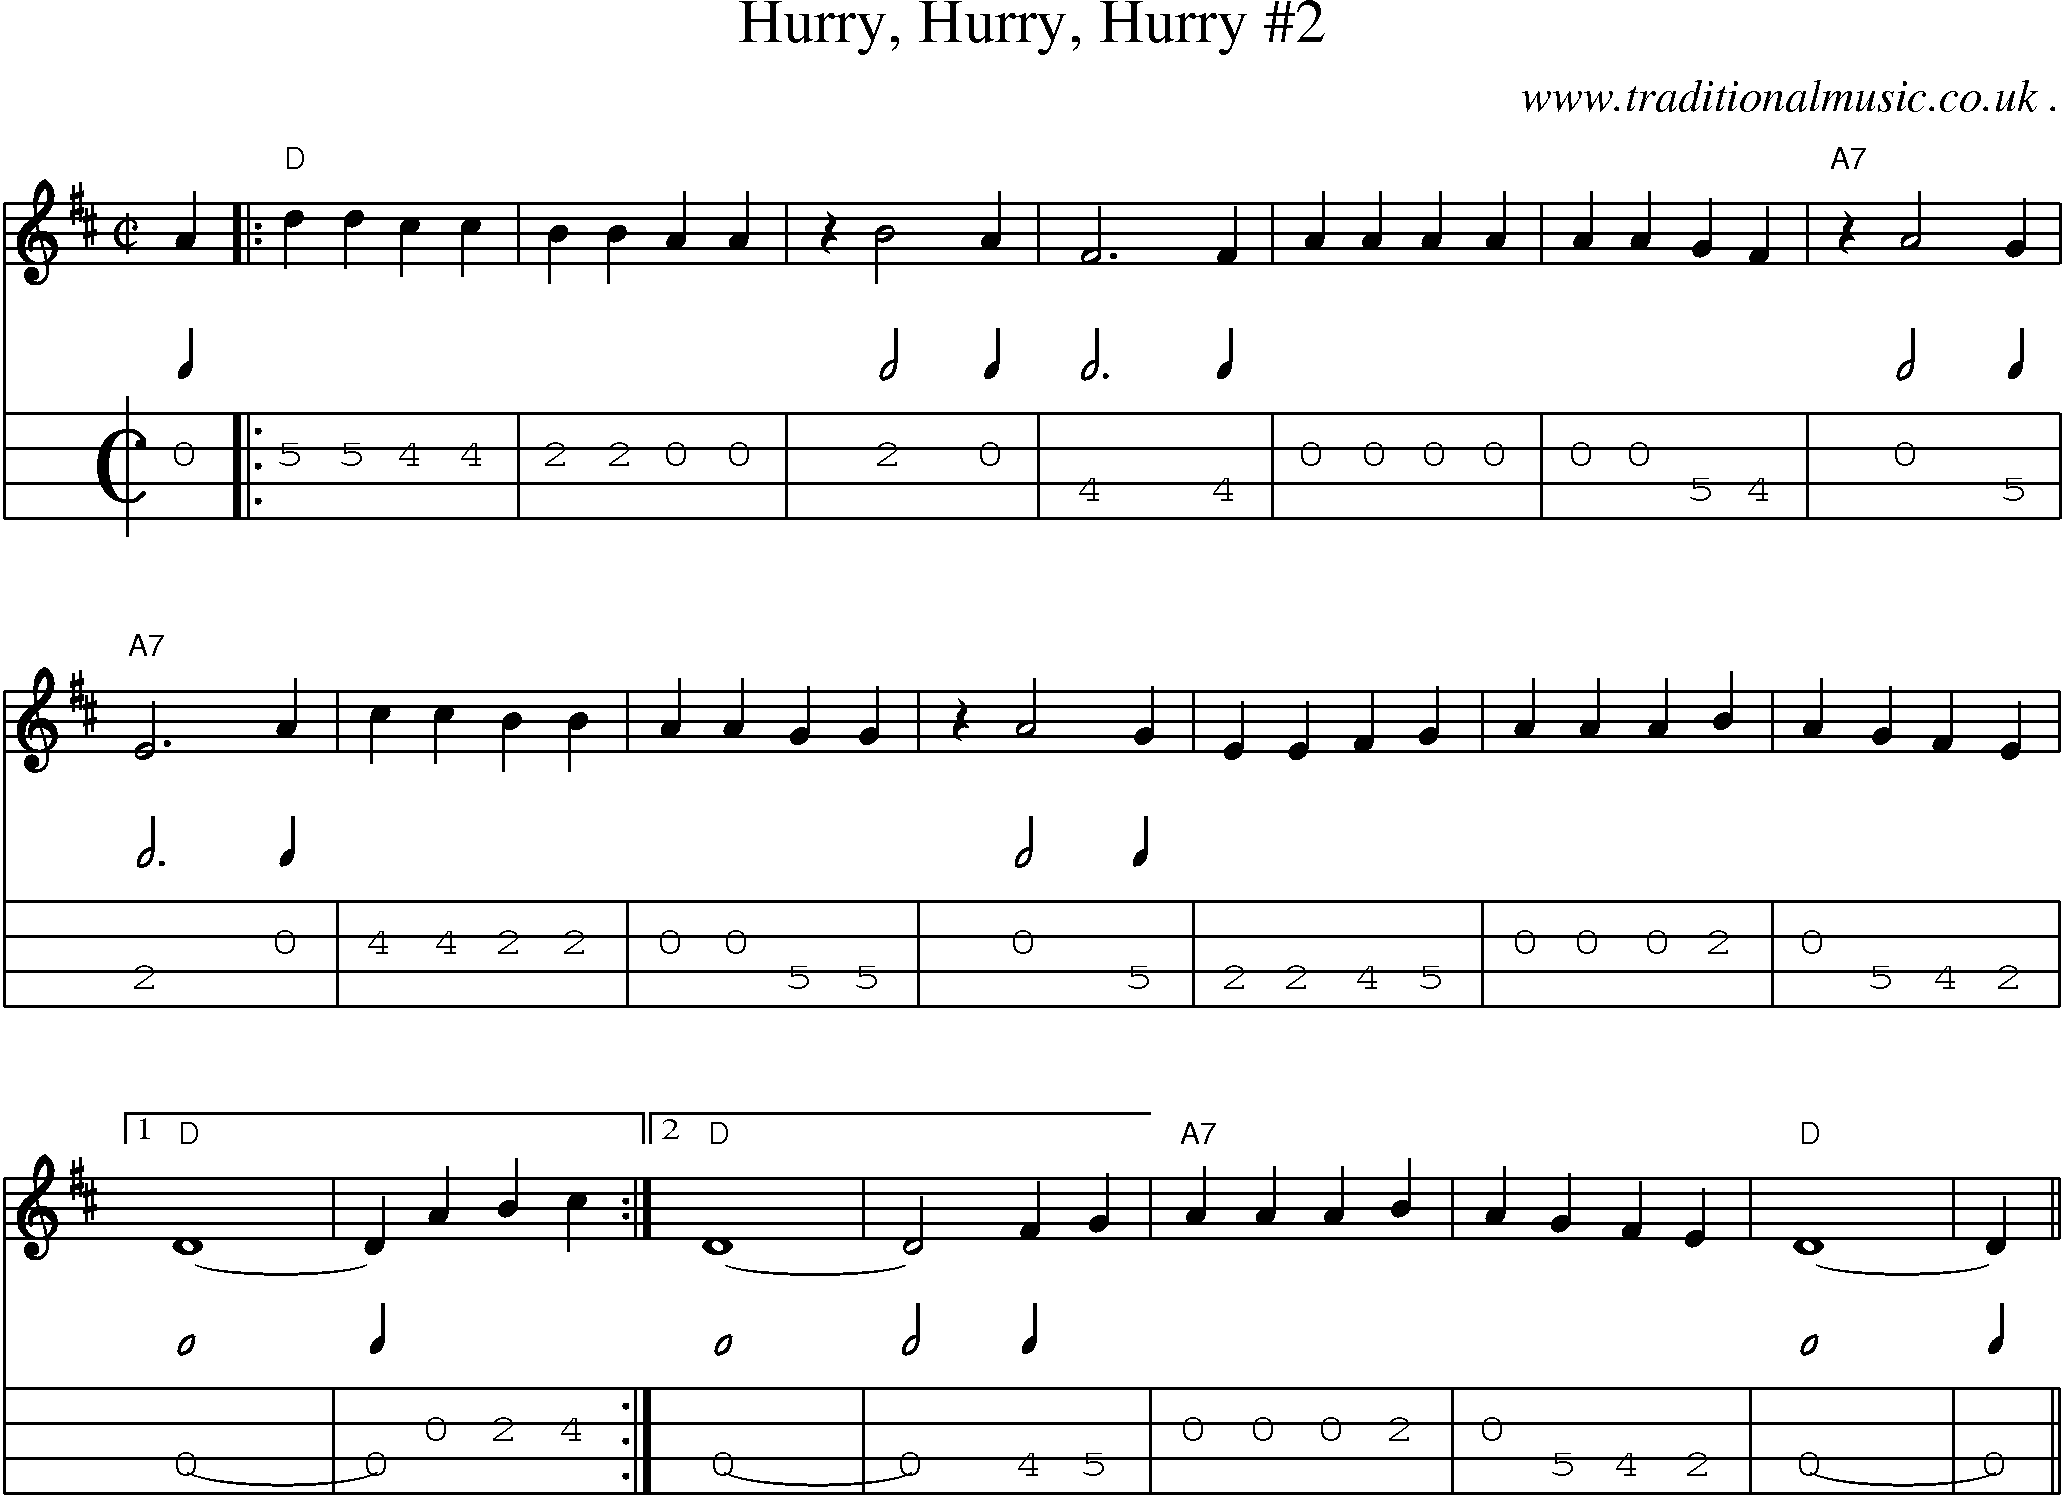 Music Score and Guitar Tabs for Hurry Hurry Hurry 2